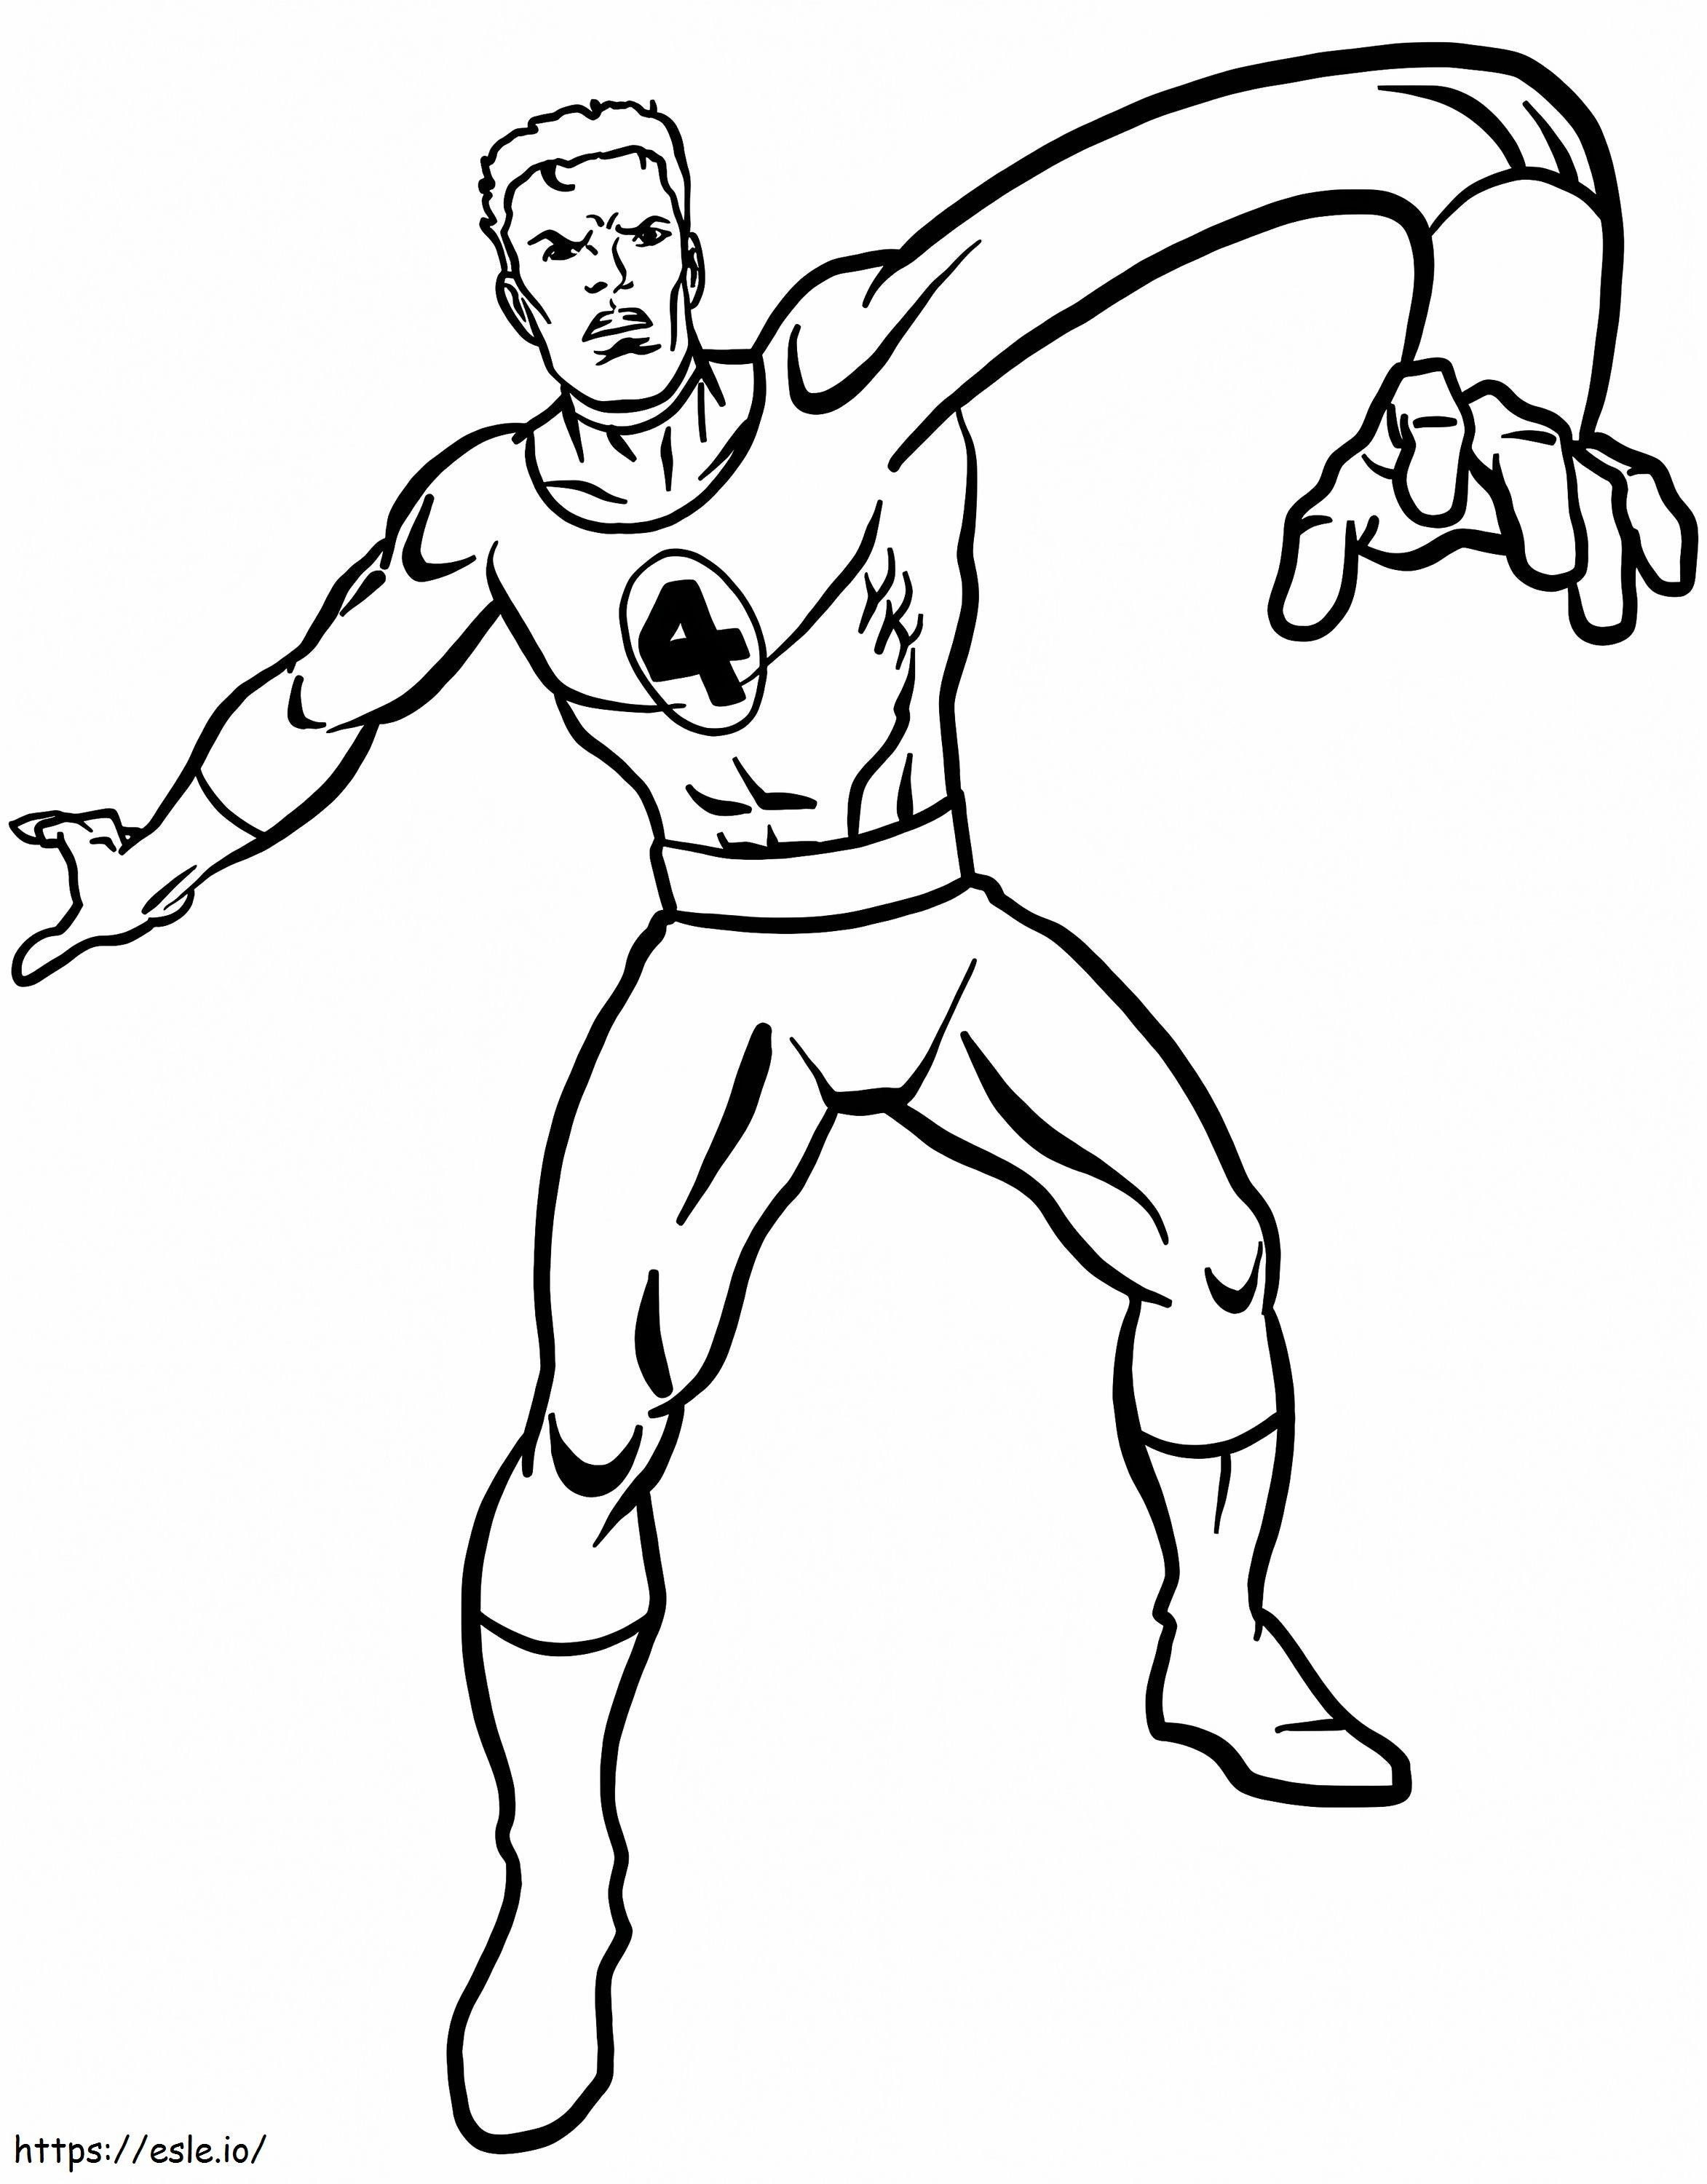 1598574212 12 2 coloring page